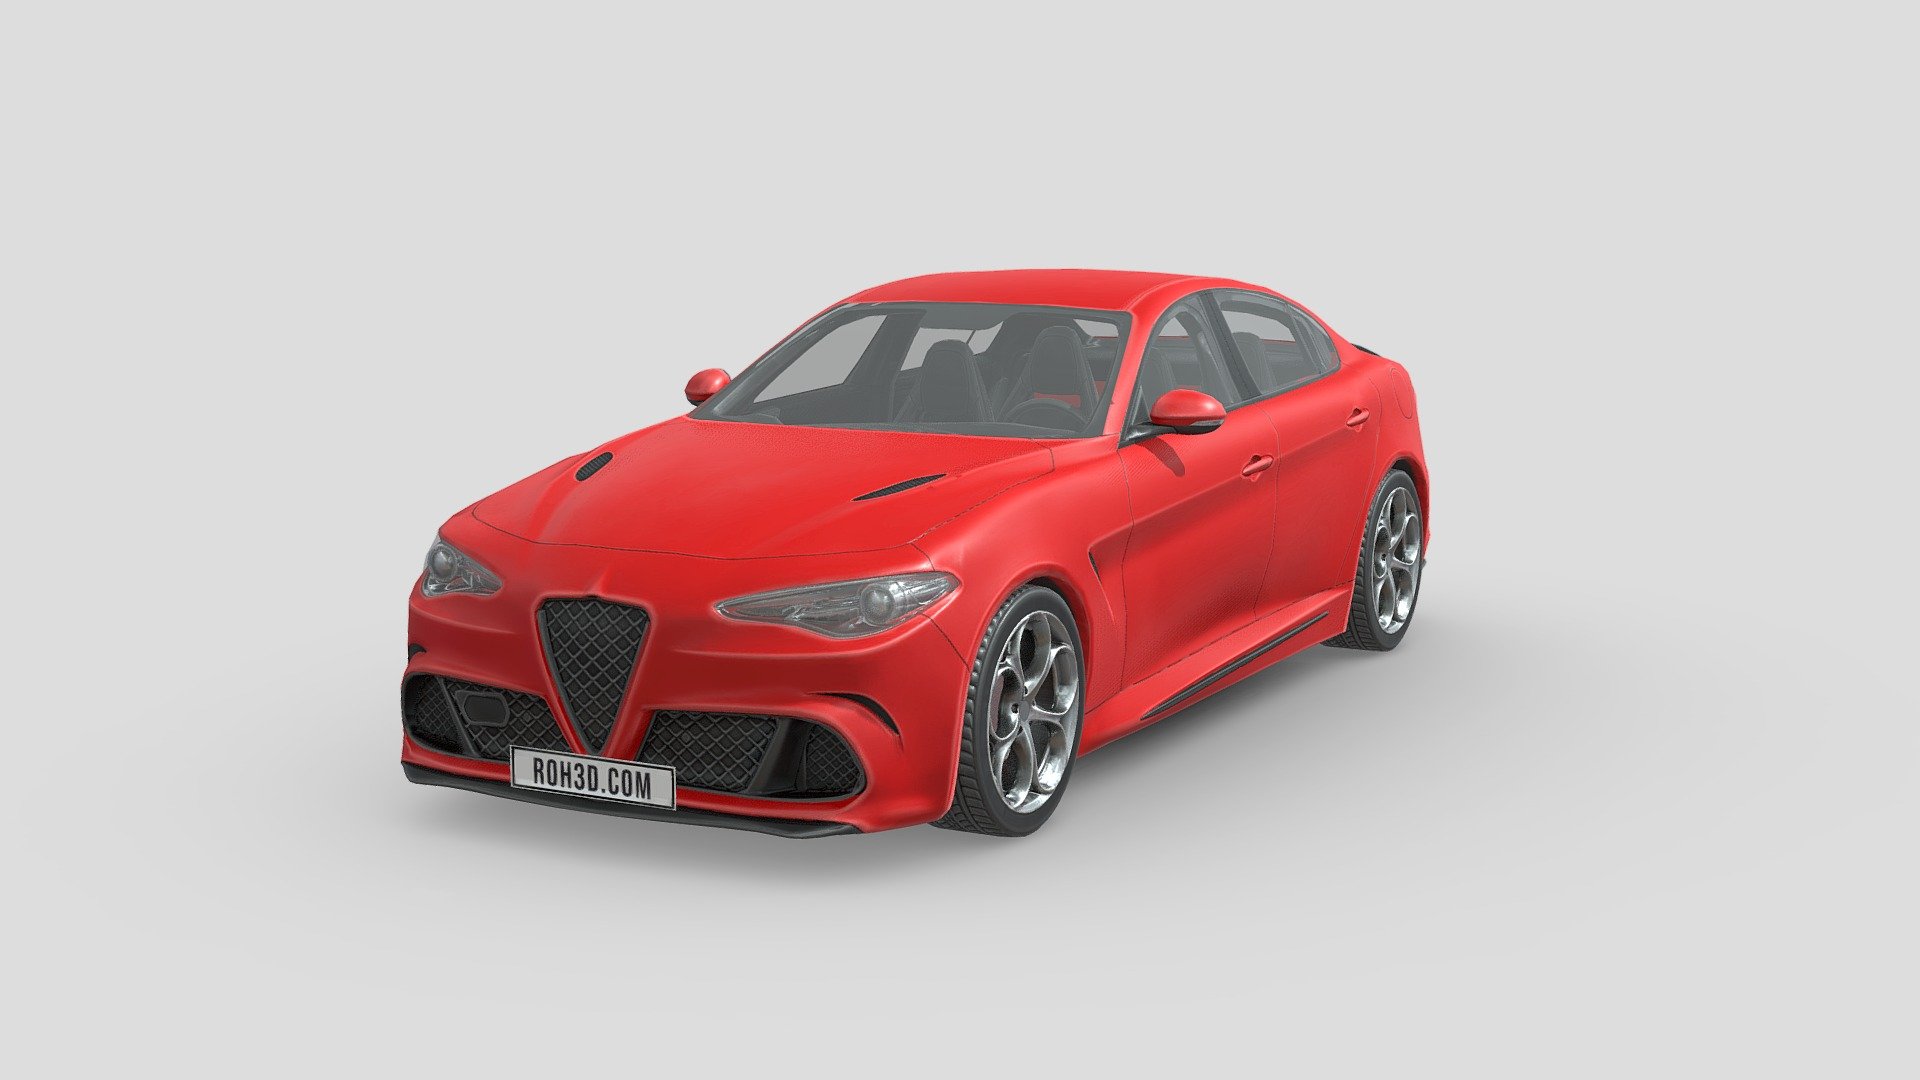 The Alfa Romeo Giulia (Type 952) is a compact executive car produced by the Italian automobile manufacturer Alfa Romeo. It was unveiled in June 2015, with market launch scheduled for February 2016, and it is the first saloon offered by Alfa Romeo after the production of the 159 ended in 2011. The Giulia is also the first mass-market Alfa Romeo vehicle in over two decades to use a longitudinal rear-wheel drive platform, since the 75 which was discontinued in 1992. The Giulia was second in 2017 European Car of the Year voting and was named Motor Trend Car of the Year for 2018. In 2018, Giulia was awarded the Compasso d'Oro industrial design award 3d model